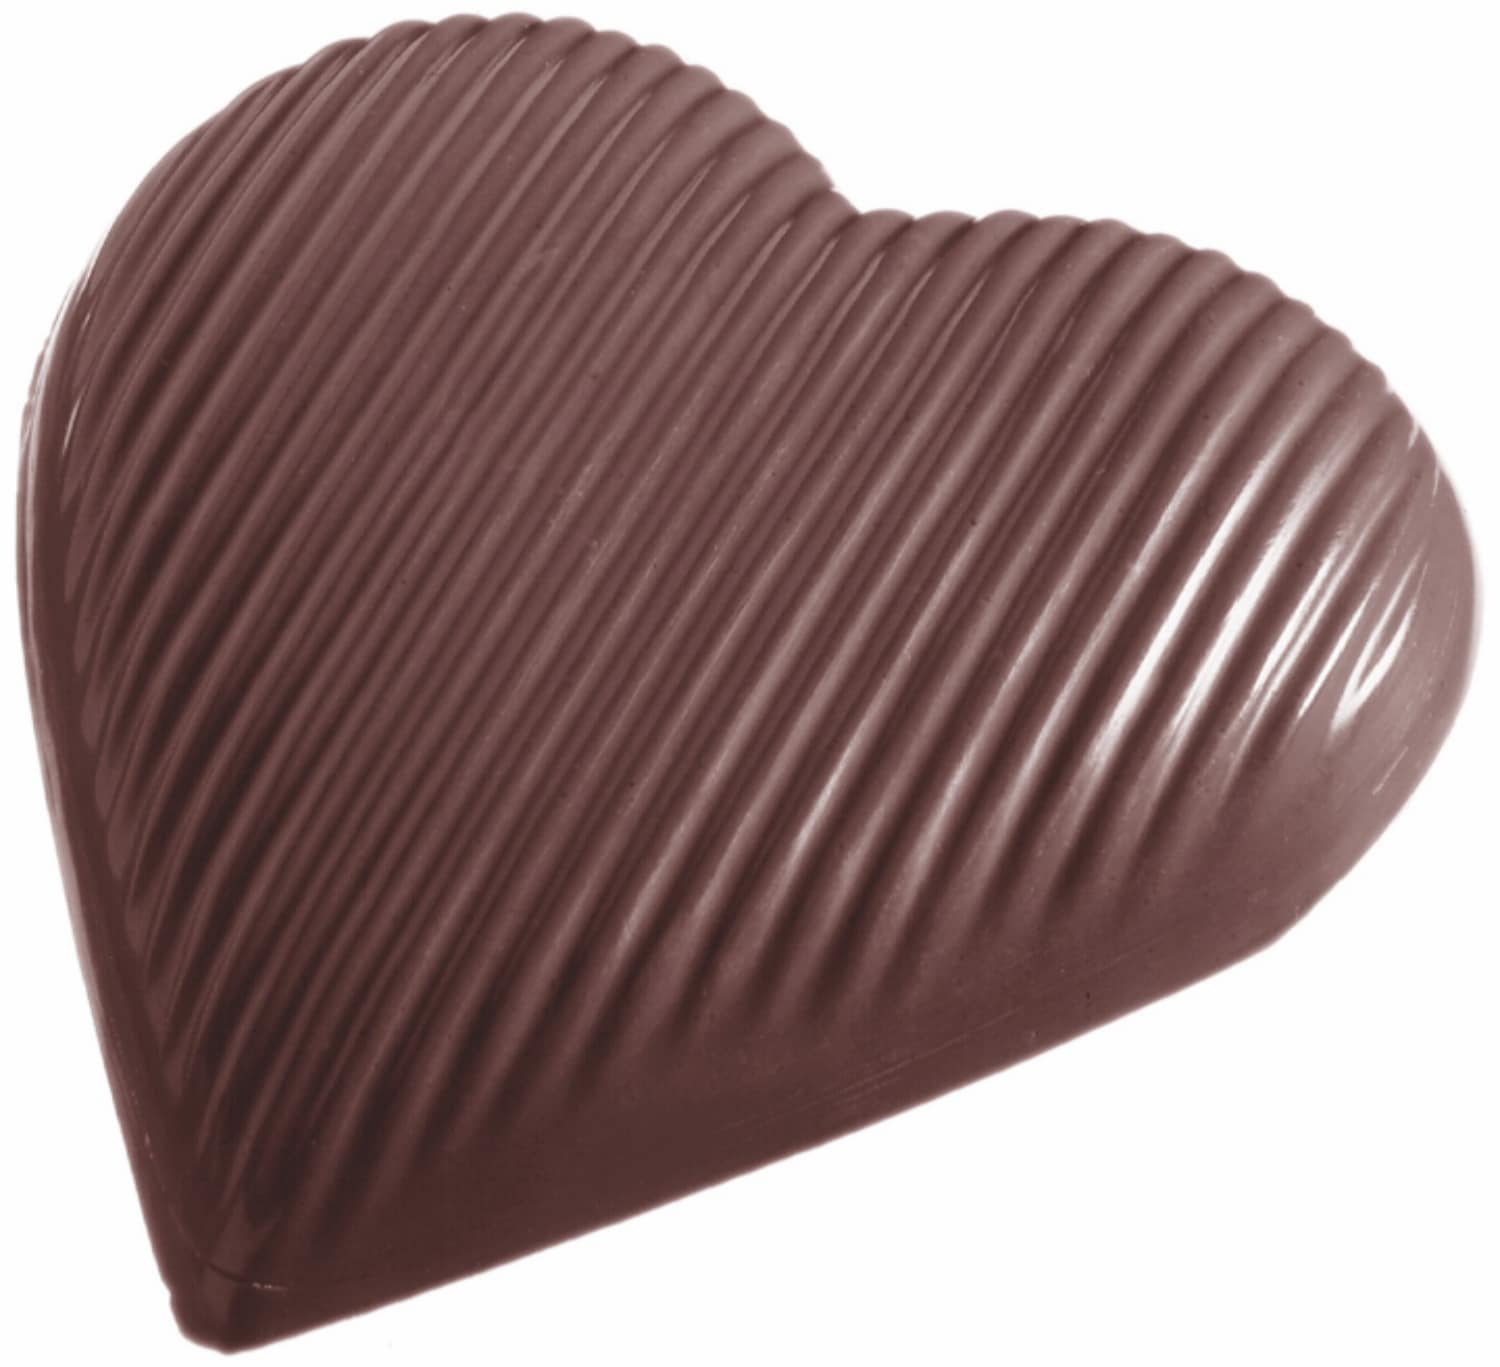 Chocolate mould "heart" 422122